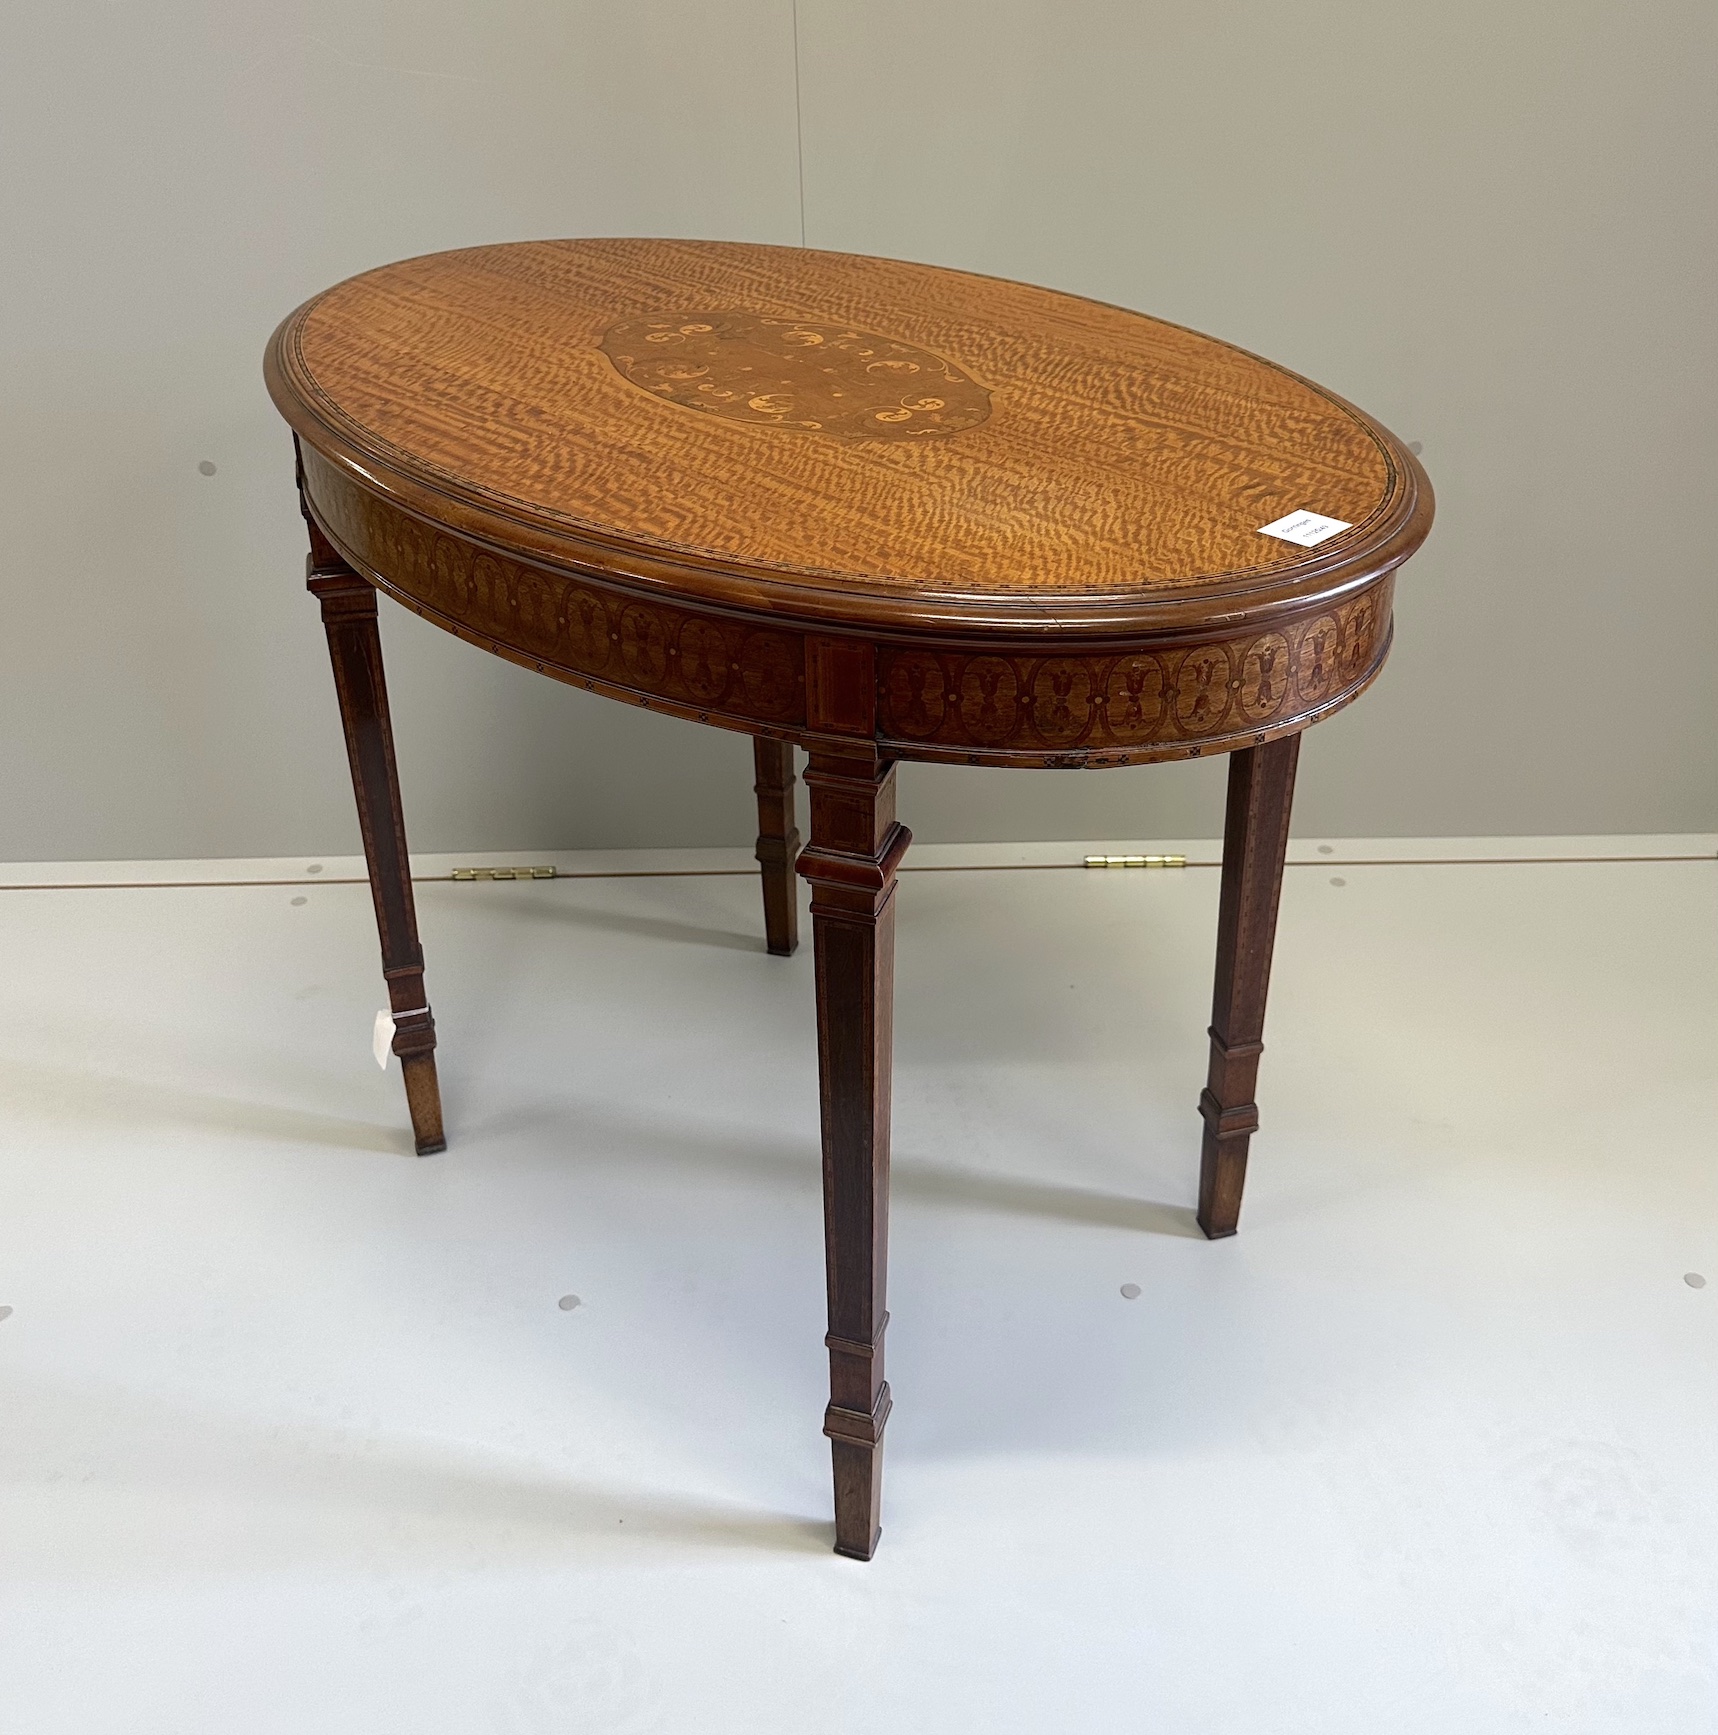 An Edwardian marquetry inlaid satinwood oval topped occasional table, width 89cm, depth 58cm, height 70cm